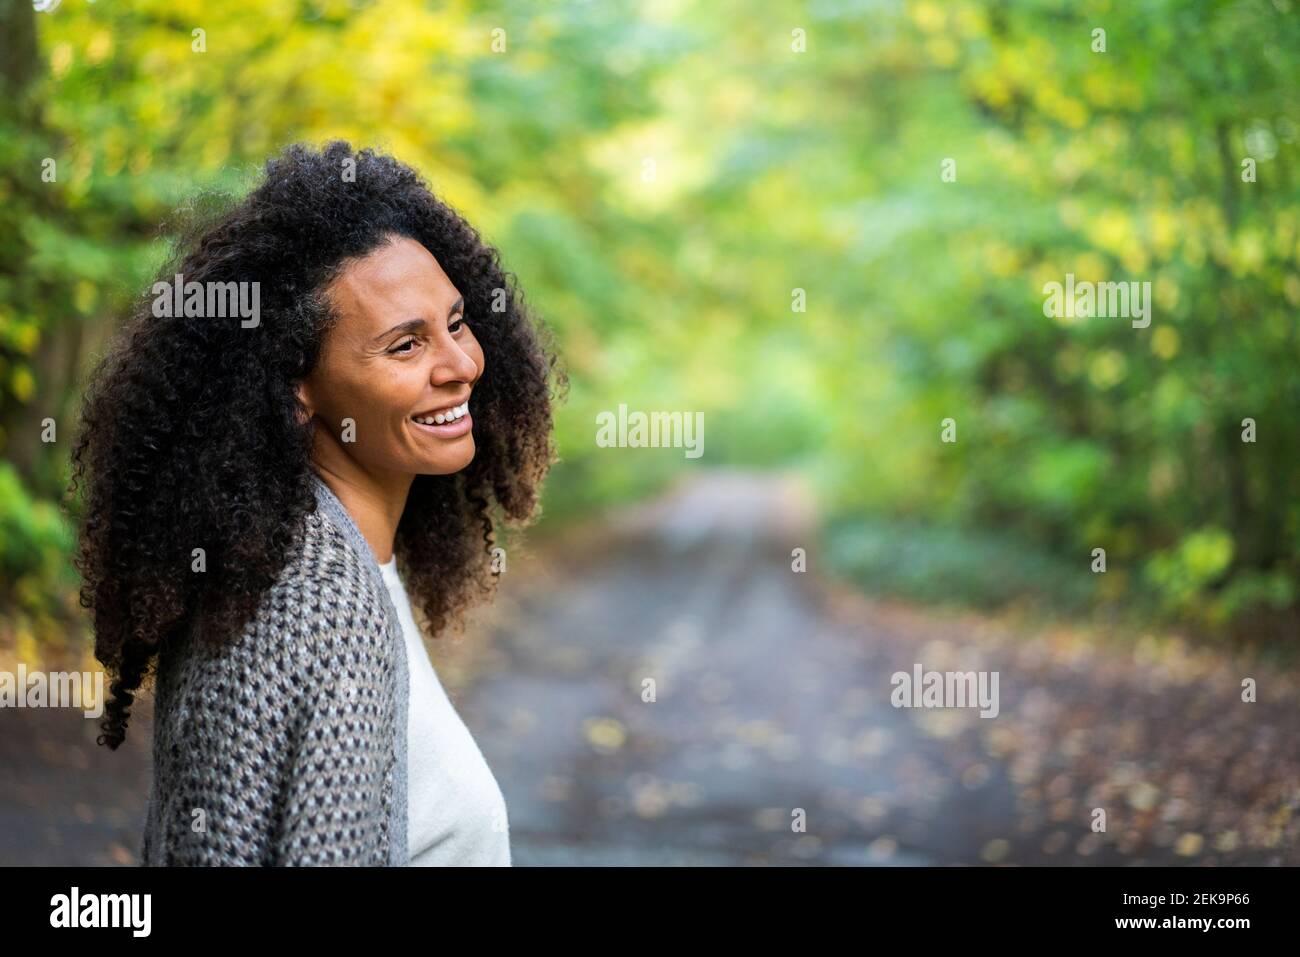 Happy woman looking away while standing in forest Banque D'Images